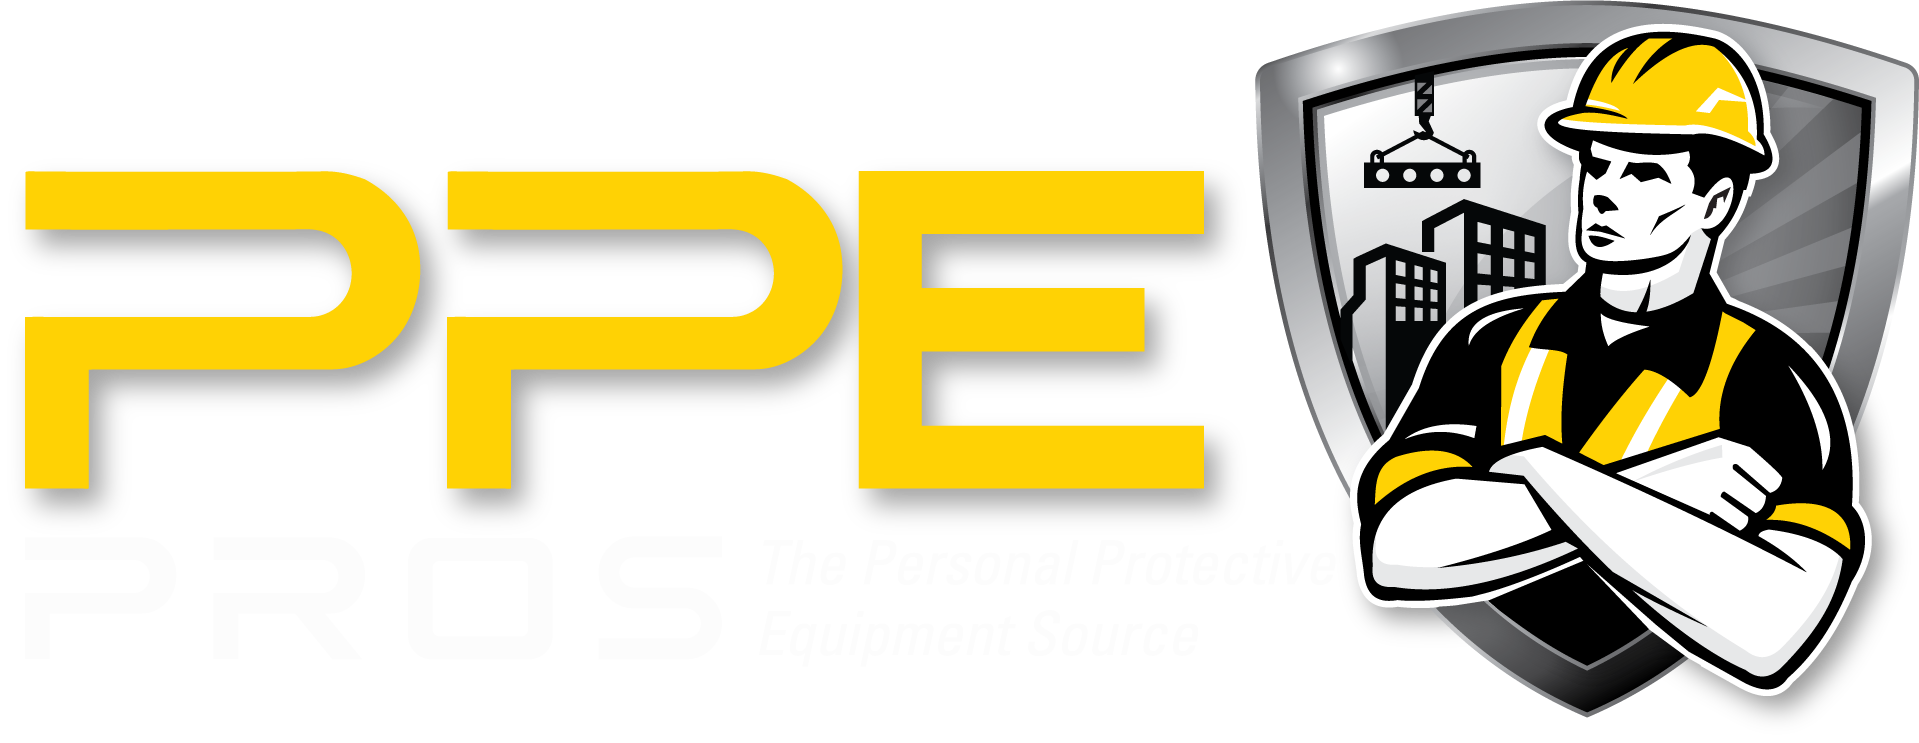 Ppe PNG - 71262